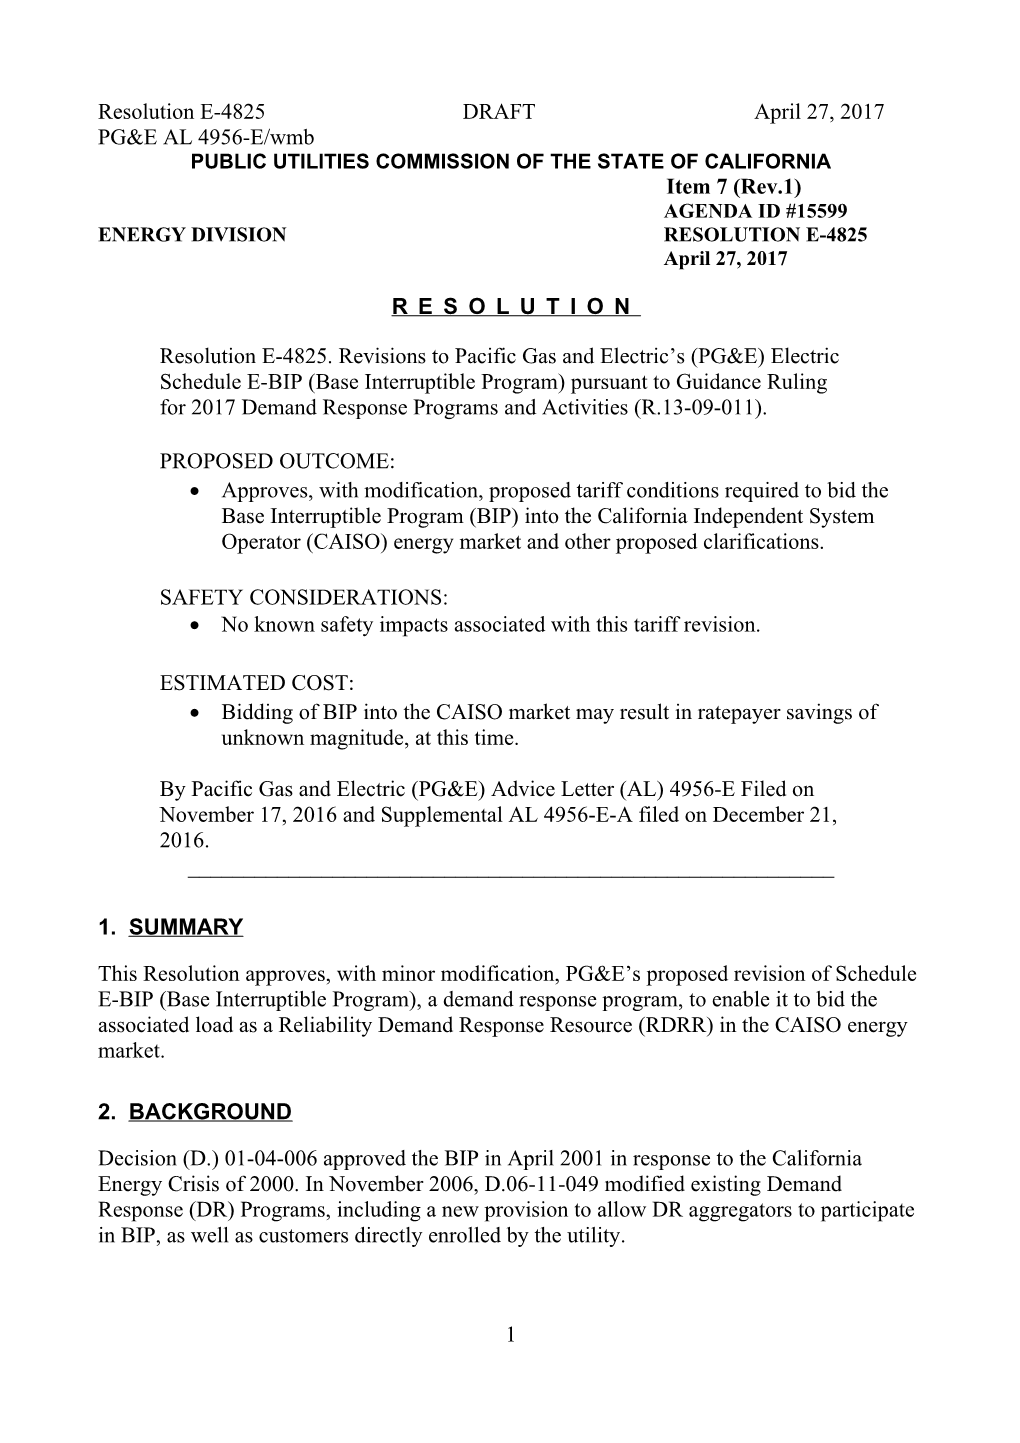 Public Utilities Commission of the State of California s80